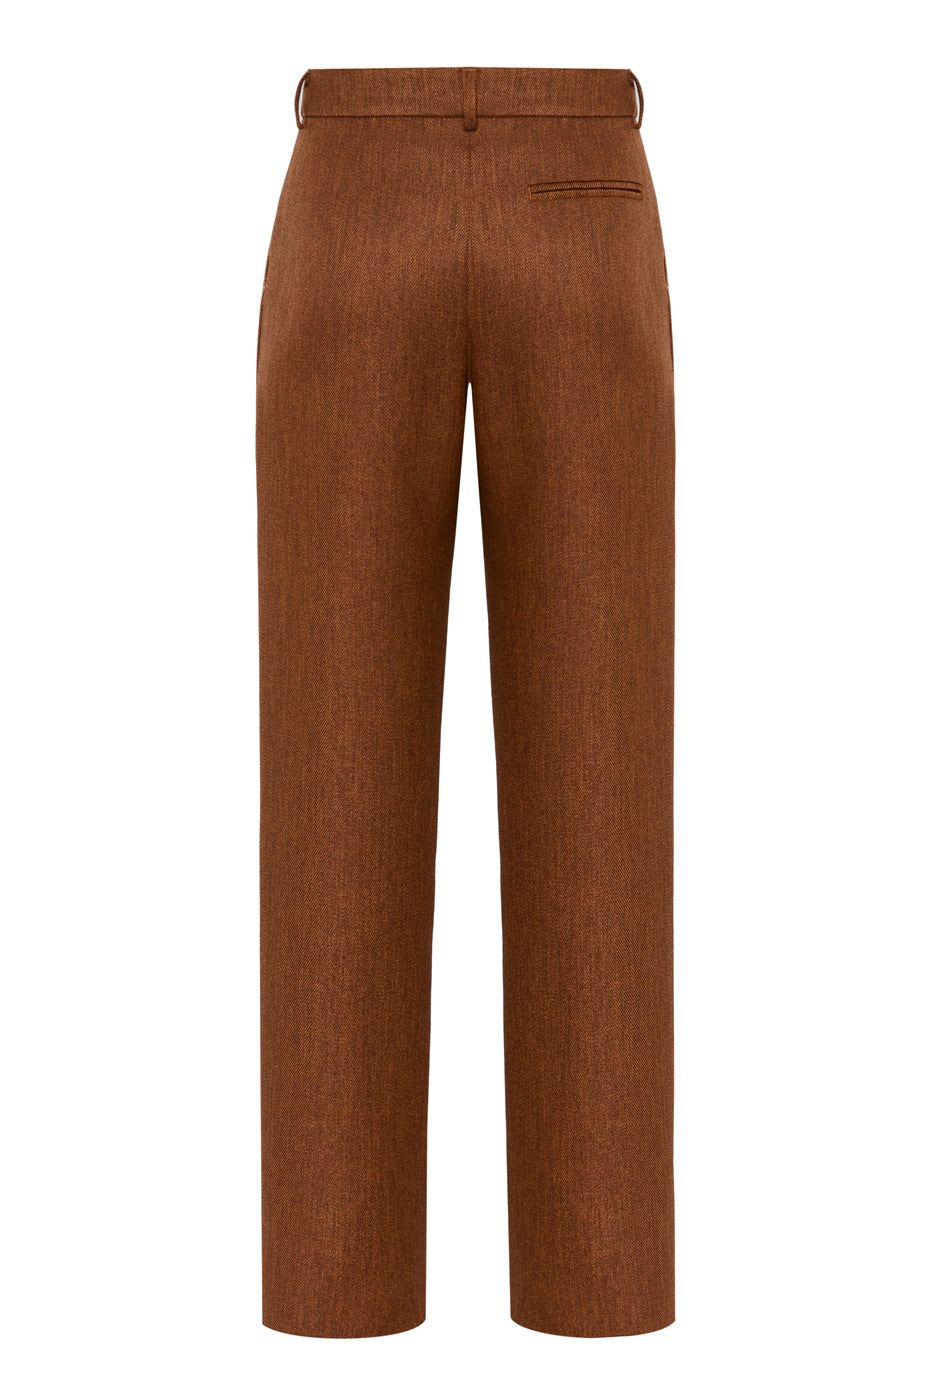 Load image into Gallery viewer, Tailored Brown Pants
